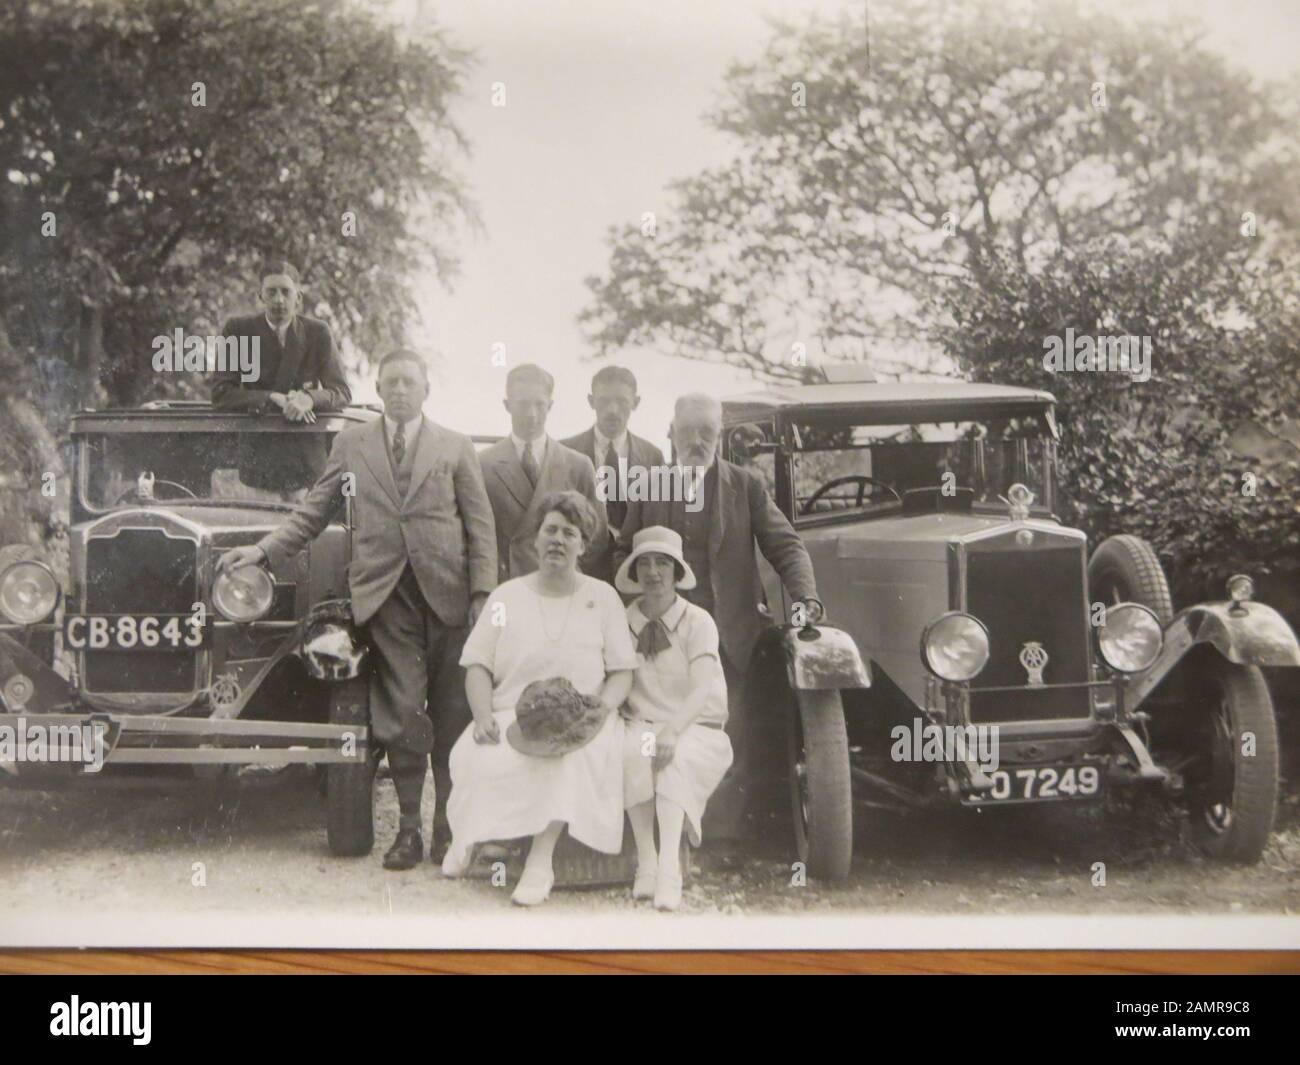 Copy of an old photo of two classic cars (vehicle reg CB 8643) and a group of people posed beside them Stock Photo